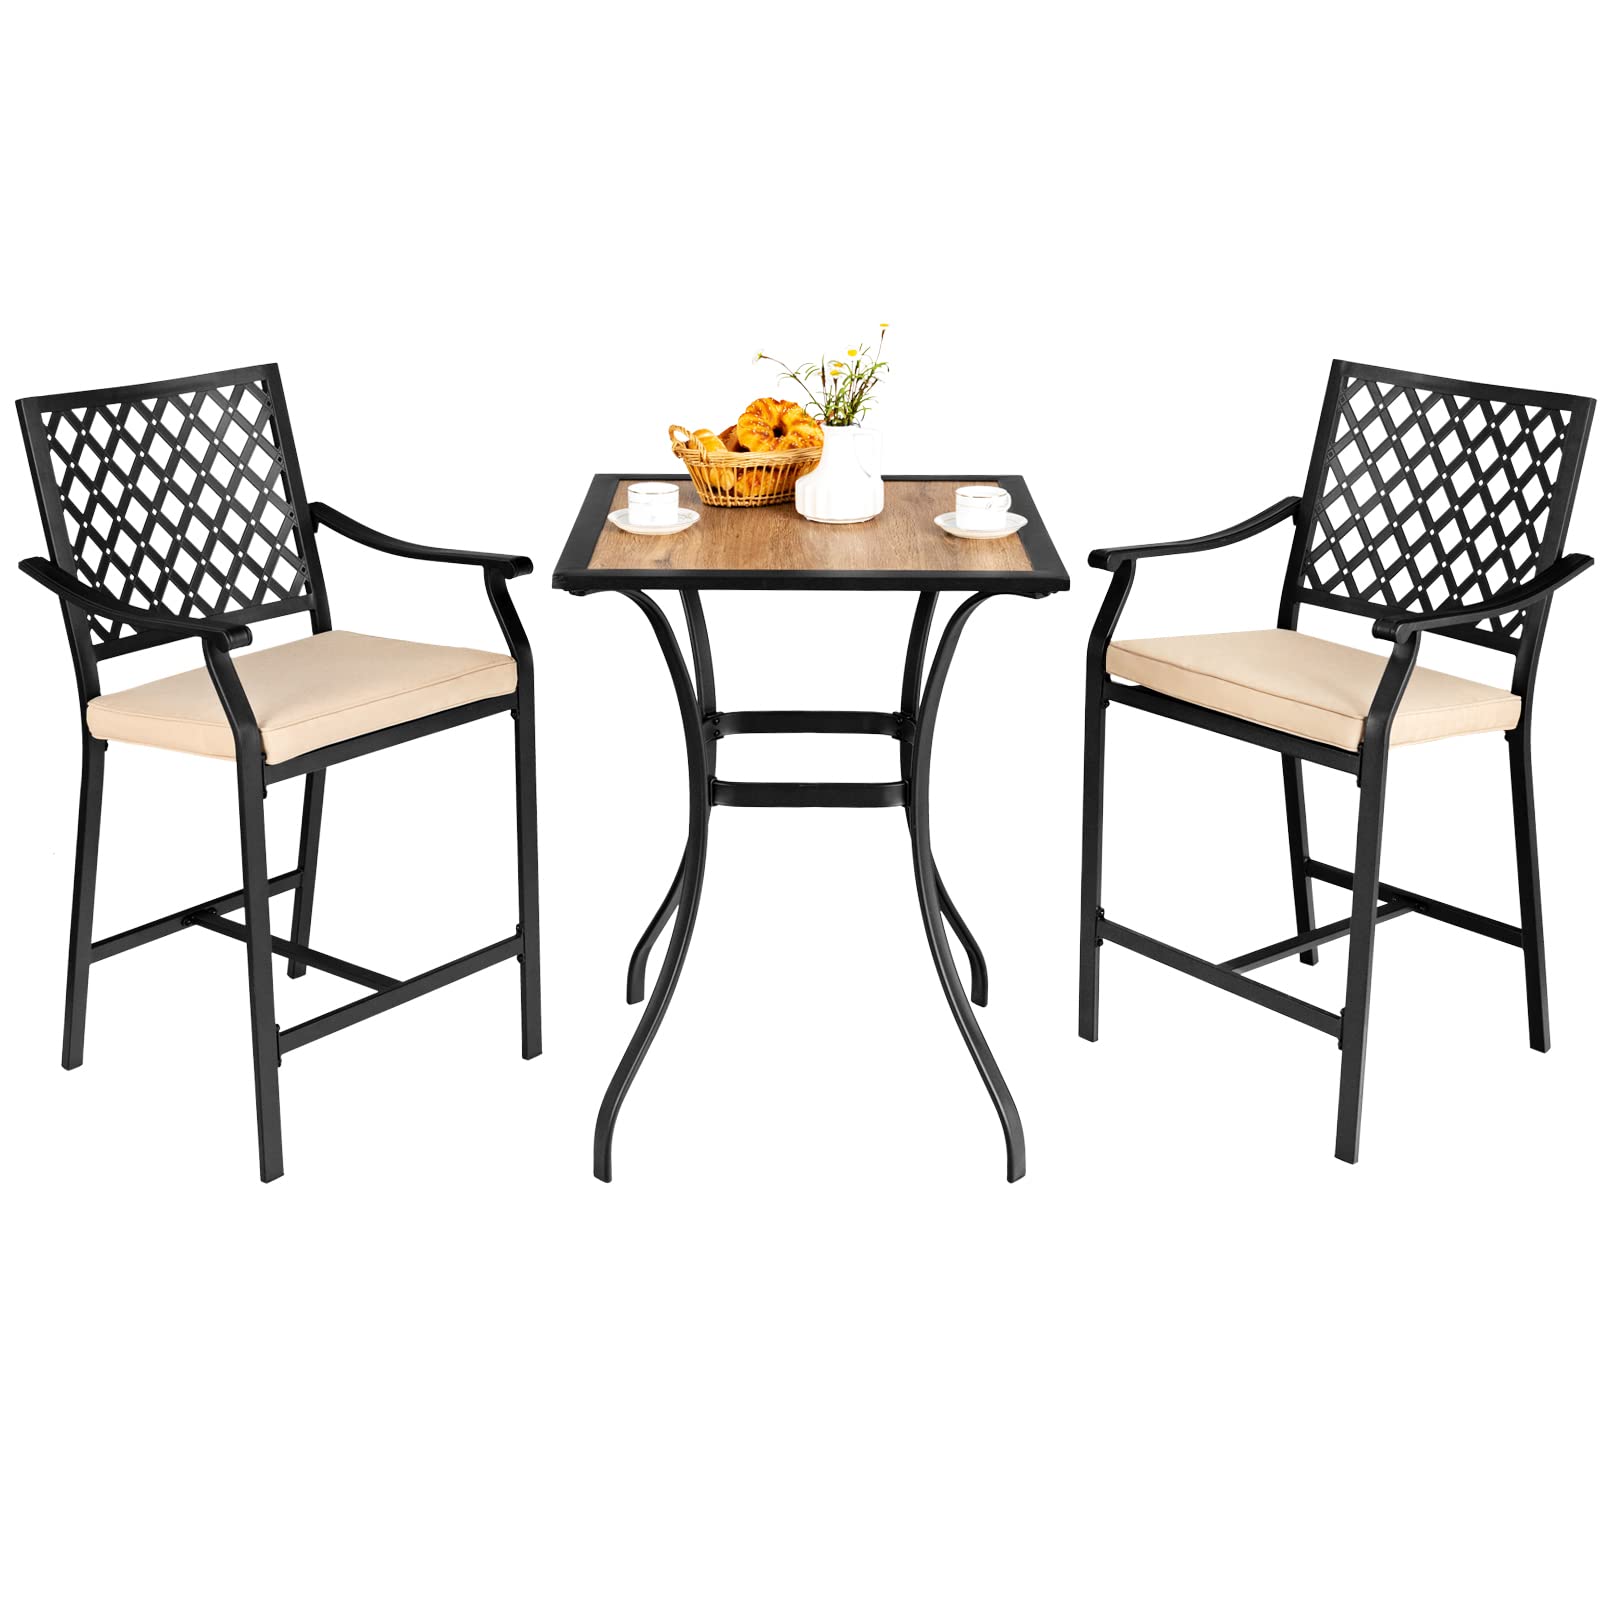 3 Piece Patio Bar Table Set Outdoor Square Bistro Bar Table High Chairs with Cushion Metal Stool